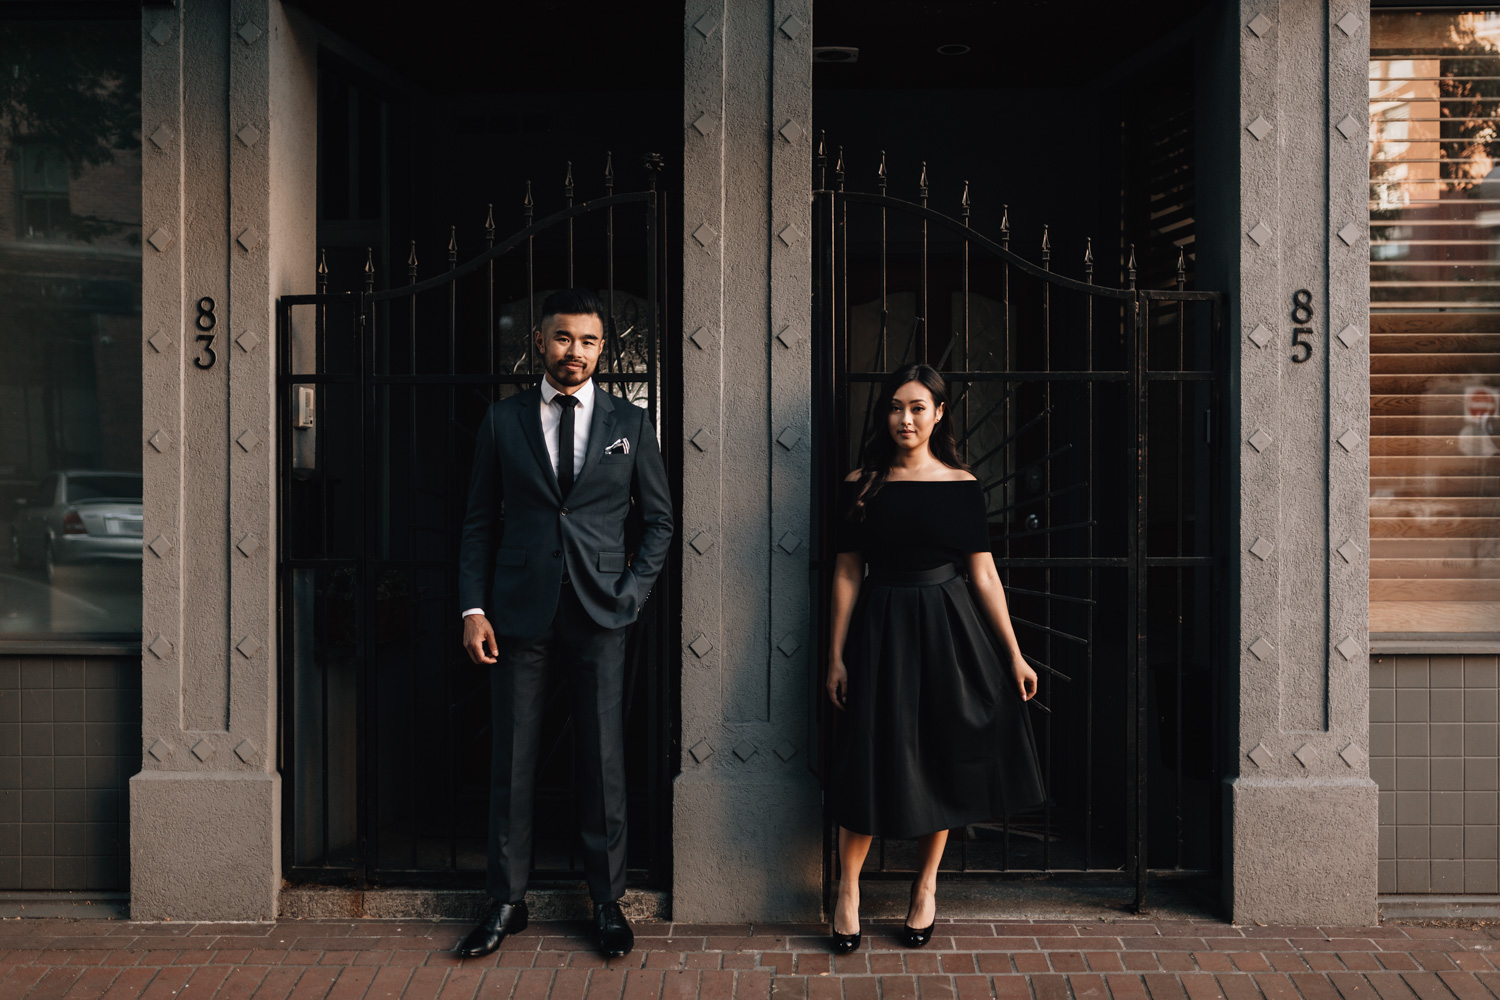 gastown engagement photography in vancouver bc during summer sunset